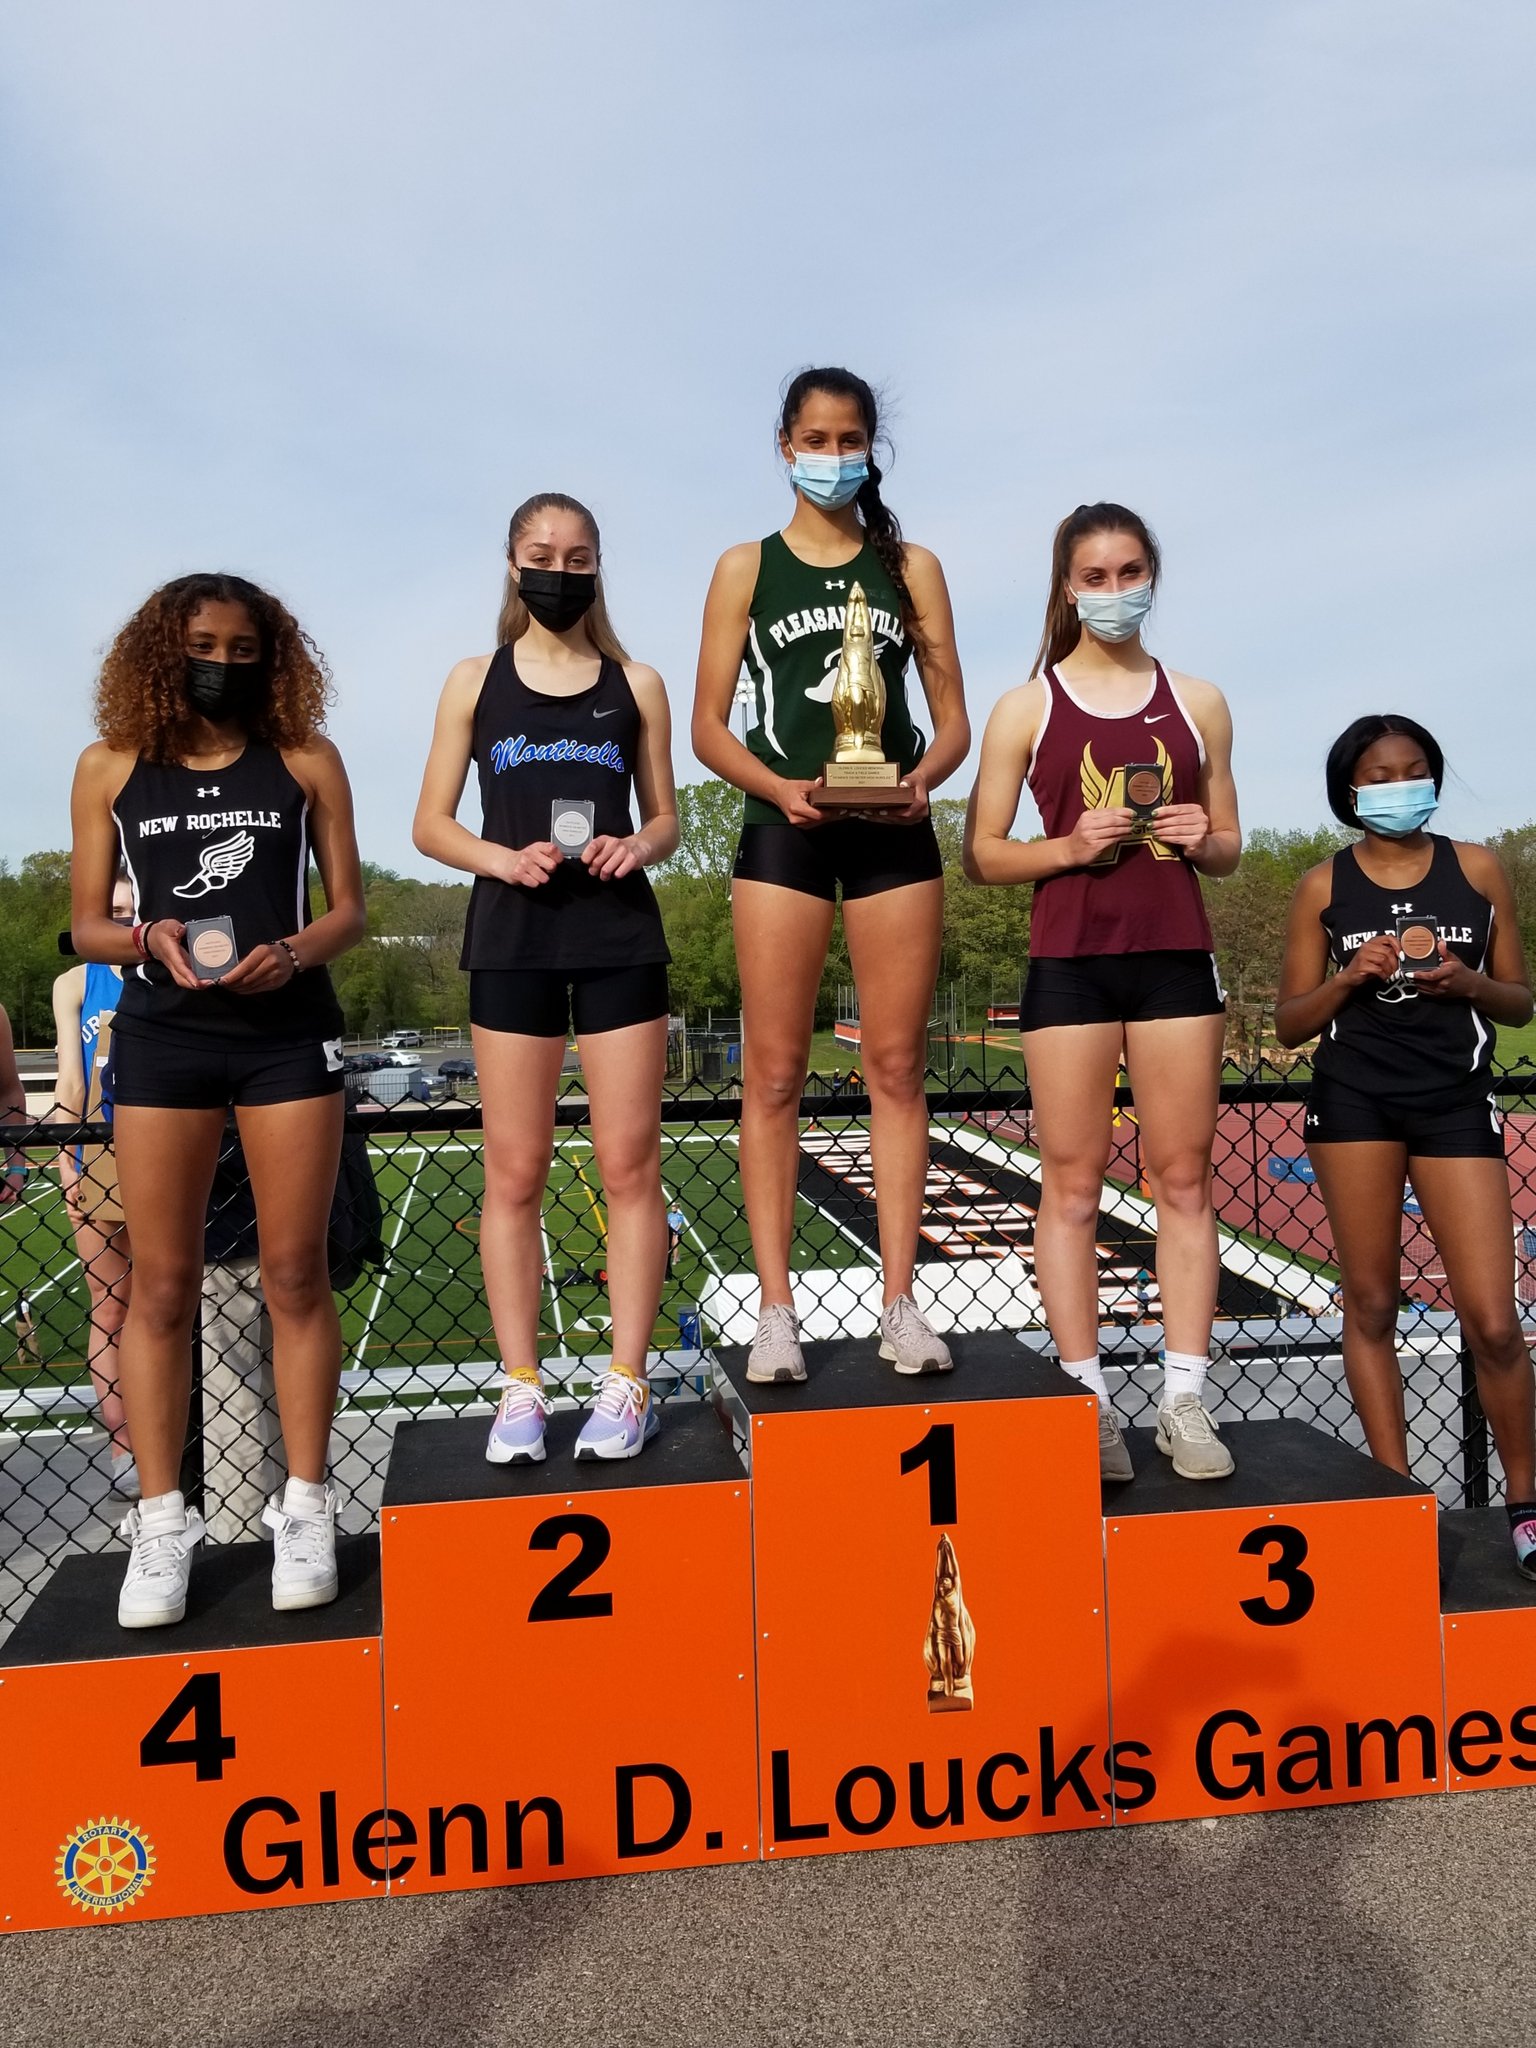 Panthers shine at Glenn D. Loucks Games Monticello Central School